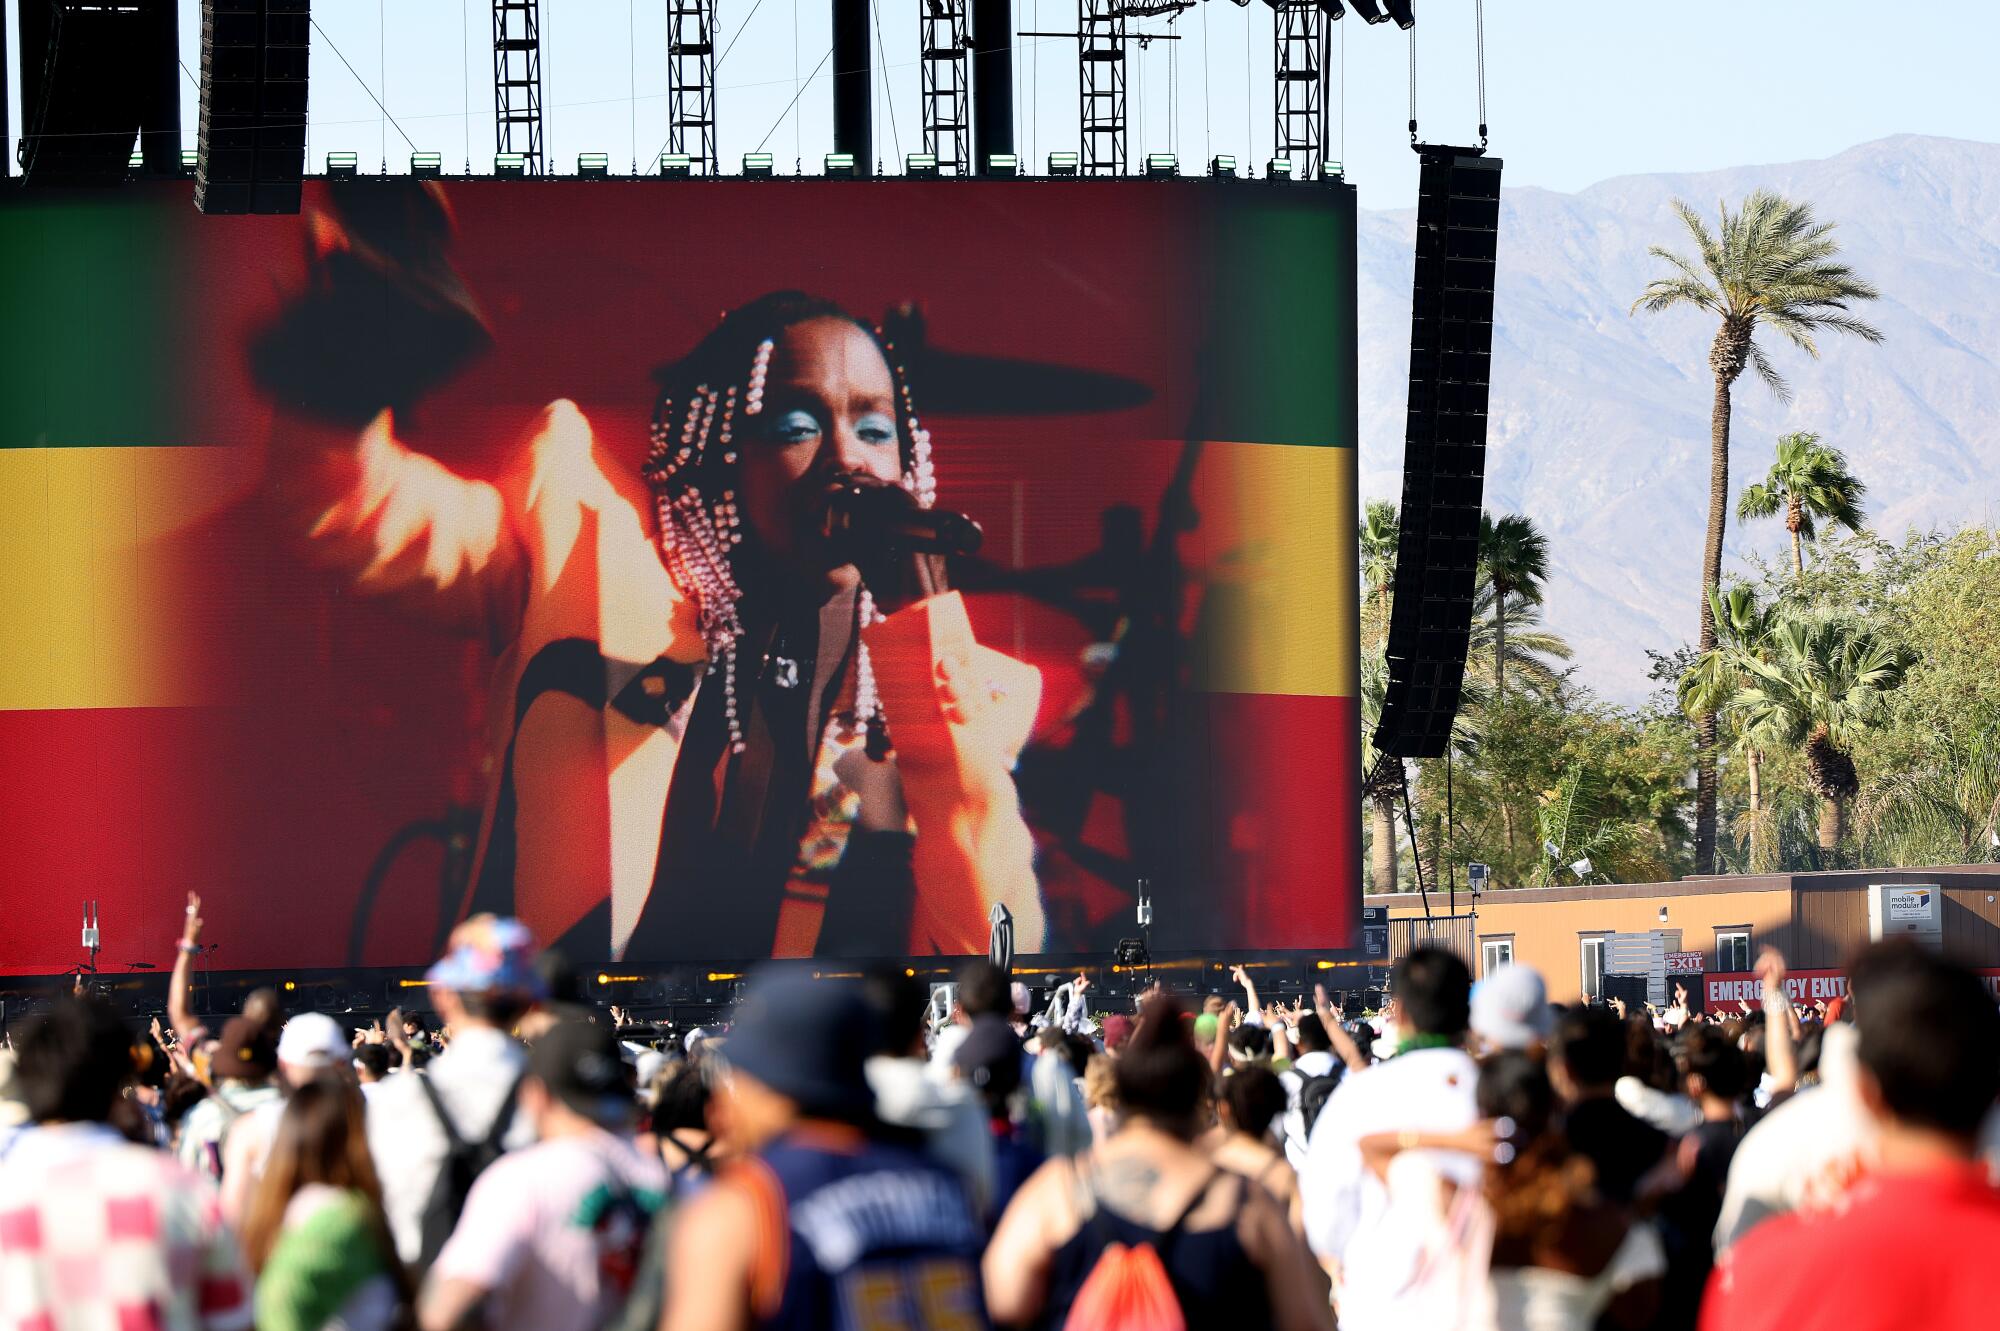 Lauryn Hill makes an appearance during YG Marley's set at Coachella.